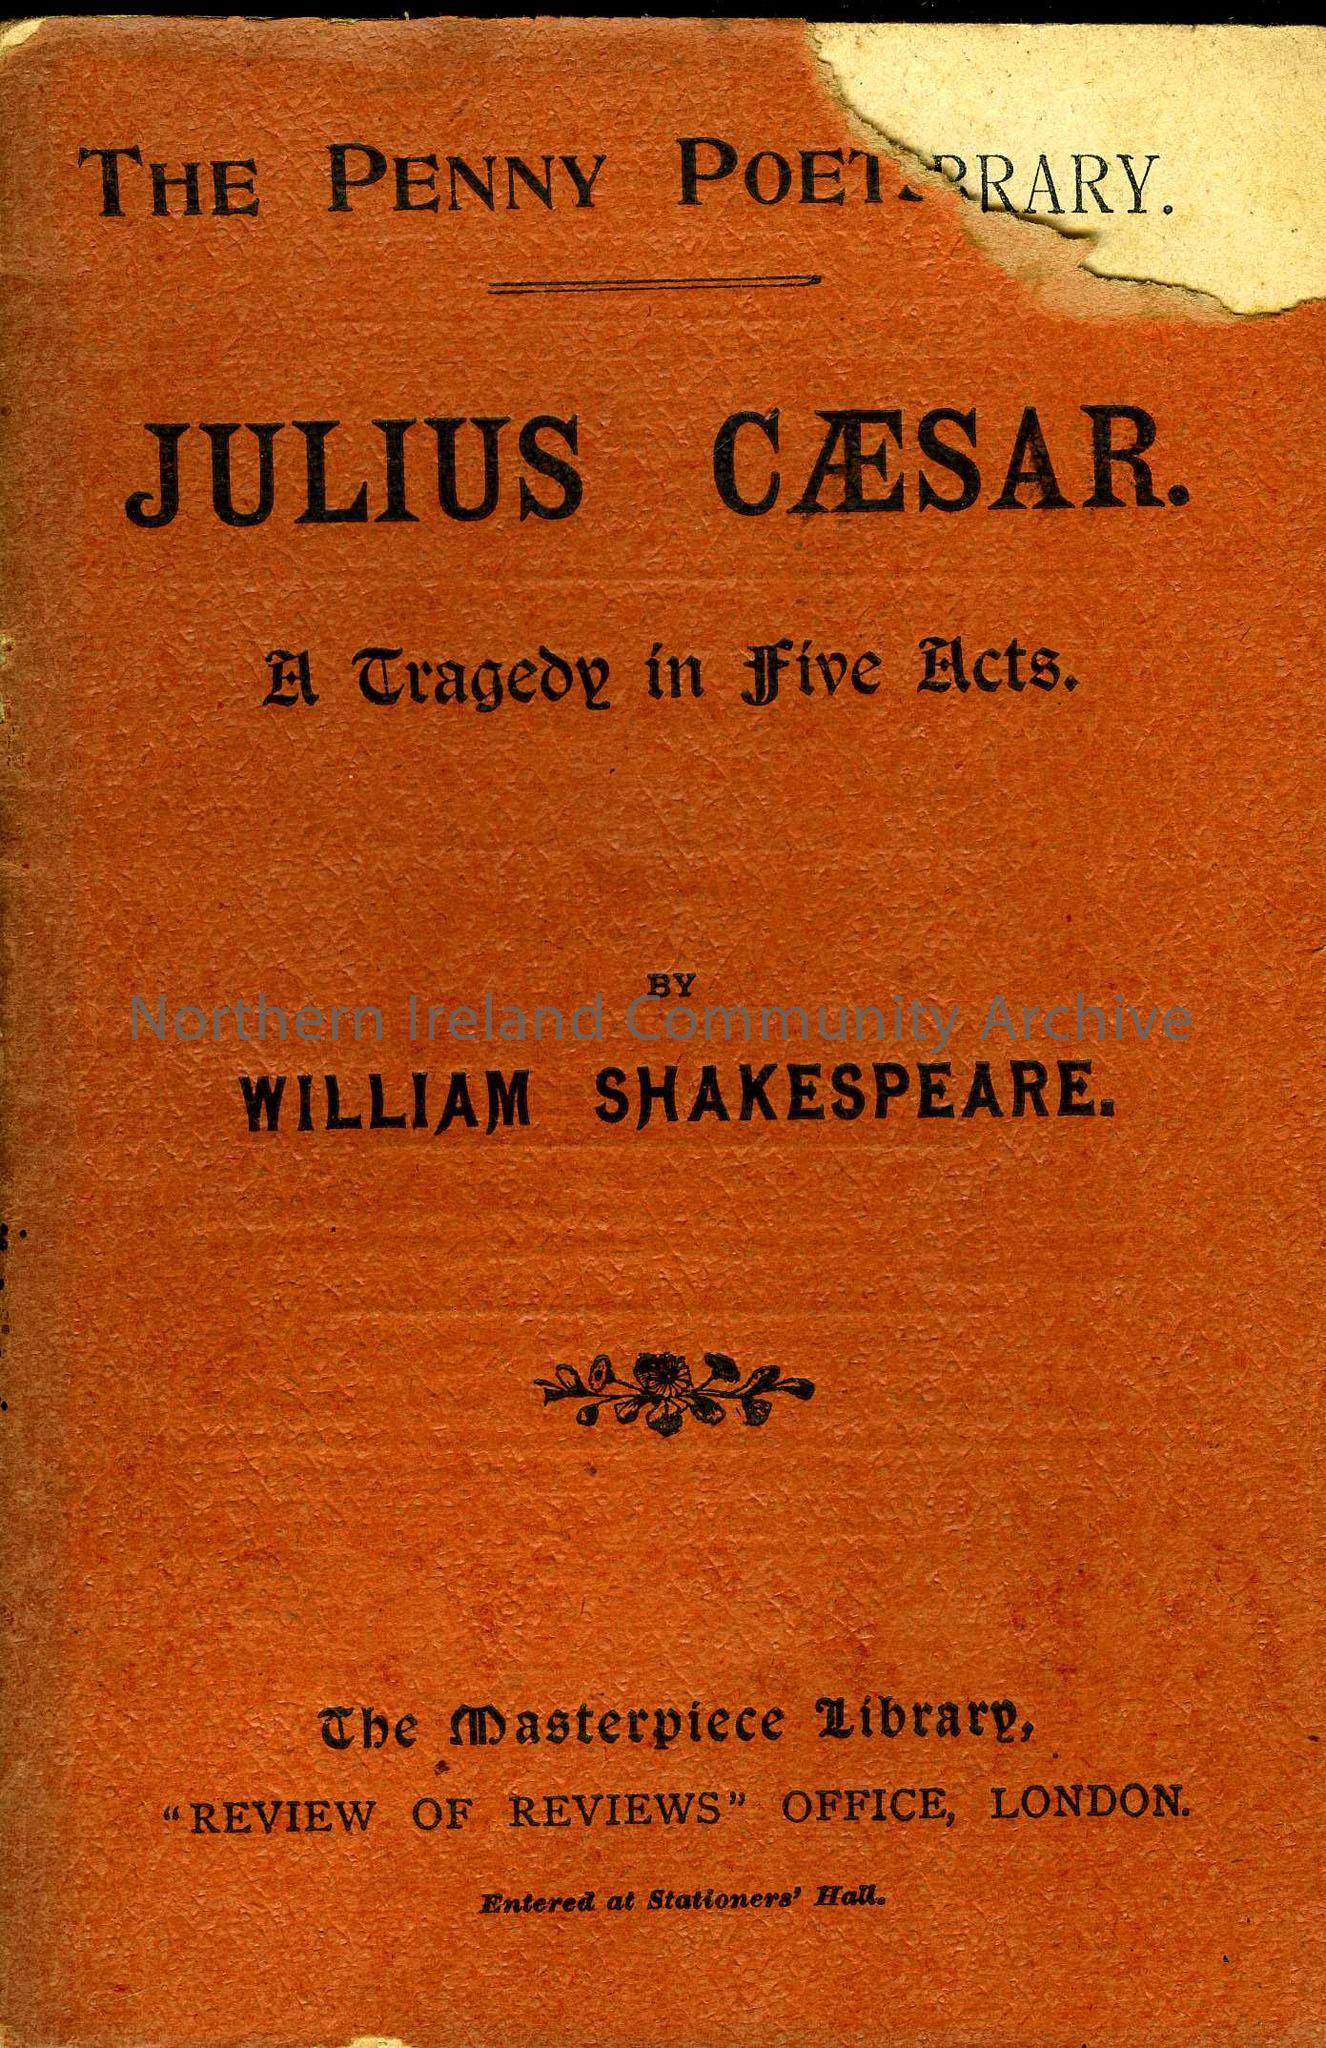 Julius Caesar A Tragedy in Five Acts by Wiliam Shakespeare